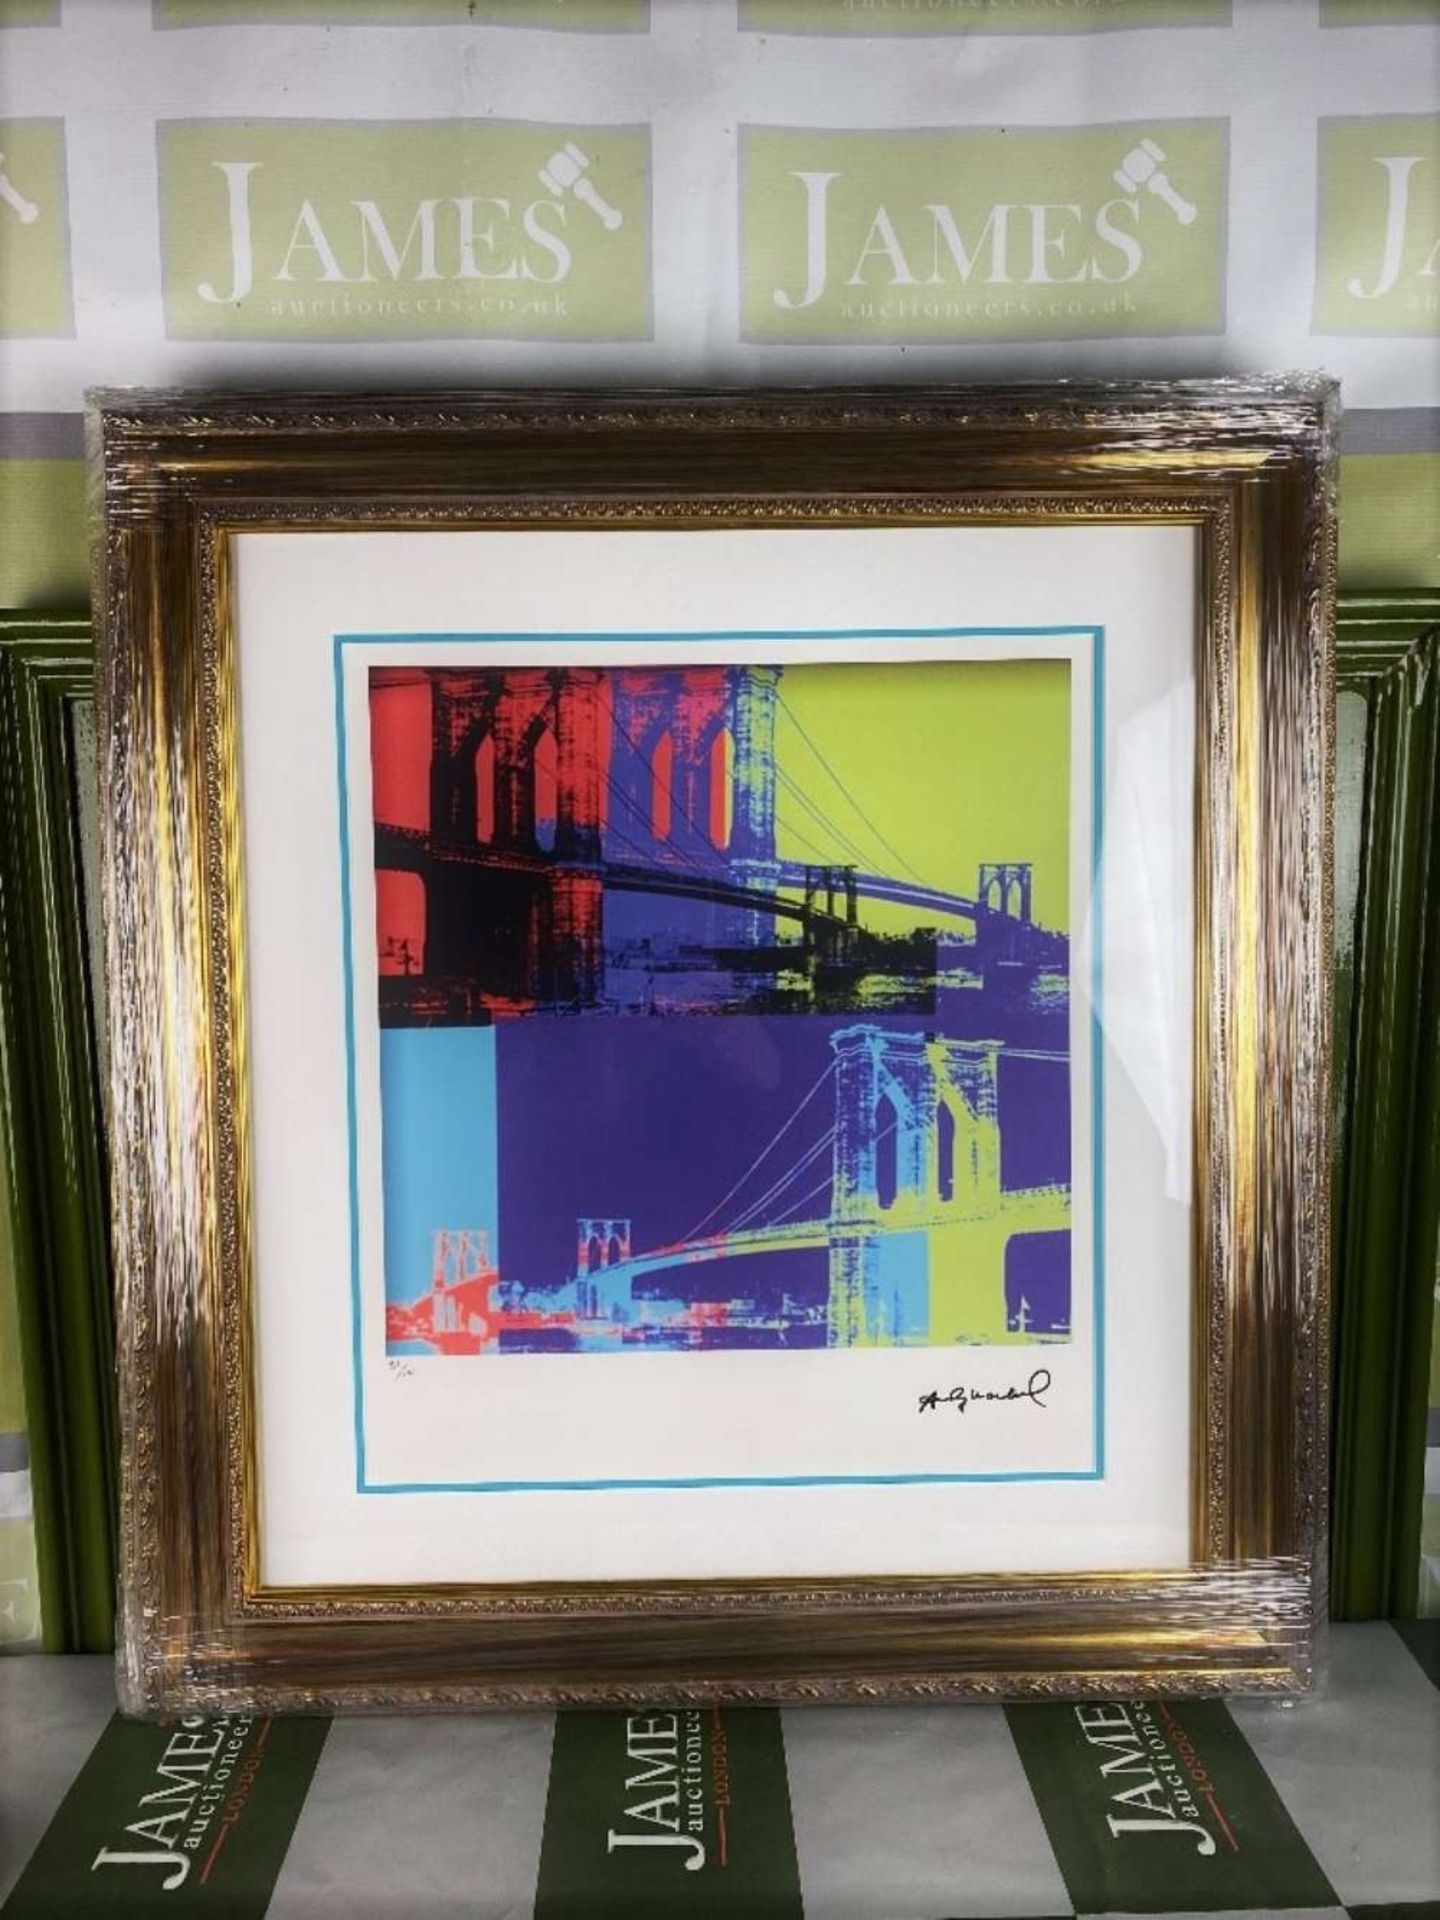 Andy Warhol (1928-1987) “Brooklyn Bridge” Numbered #91/100 Lithograph, Ornate Framed. - Image 7 of 7